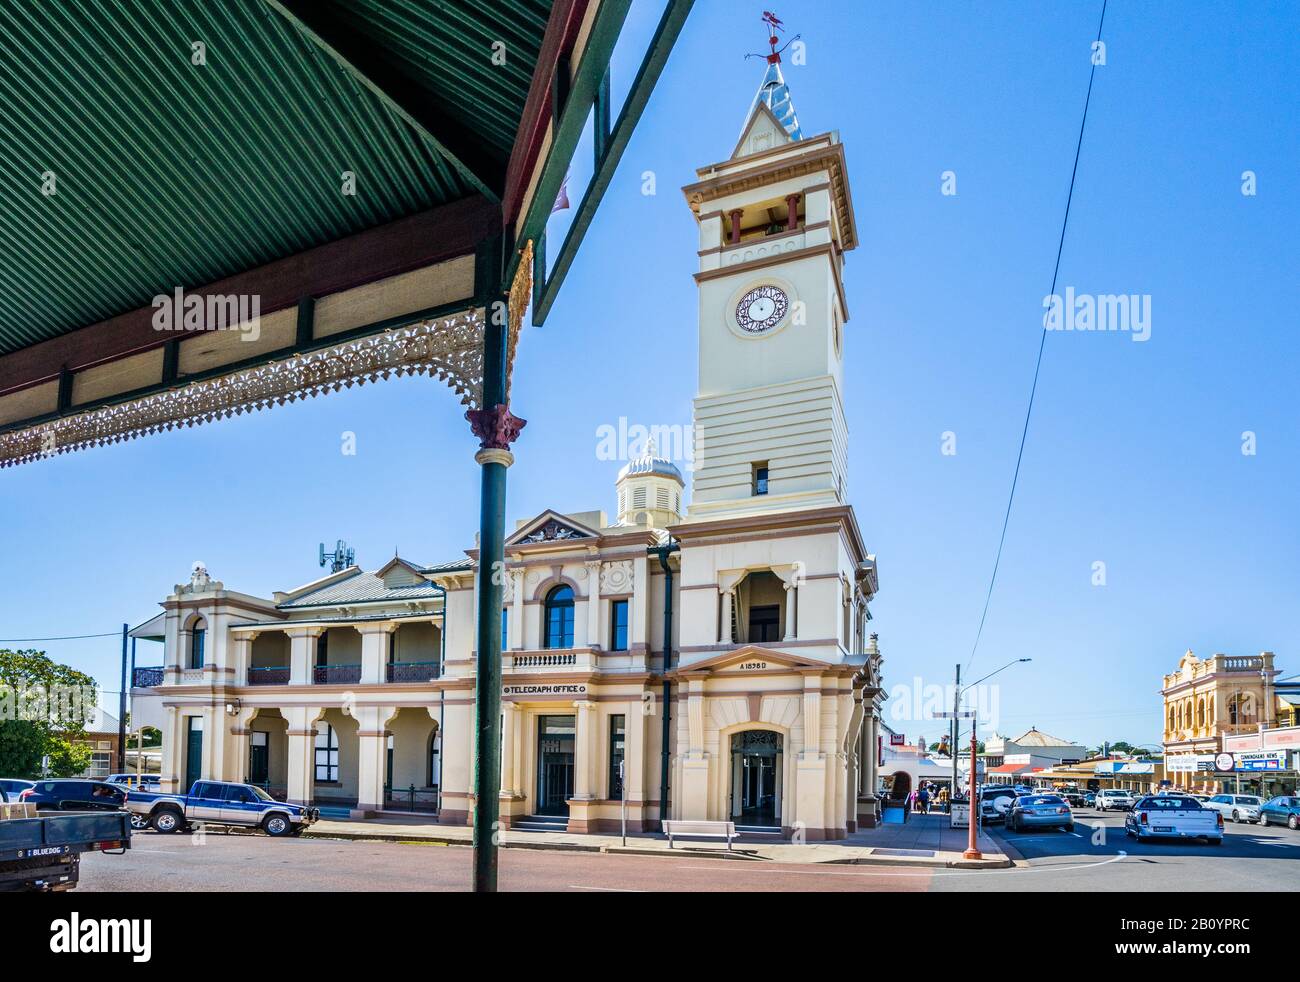 historic Charters Towers Post Office with its distinct clock tower, Northern Queensland, Australia Stock Photo